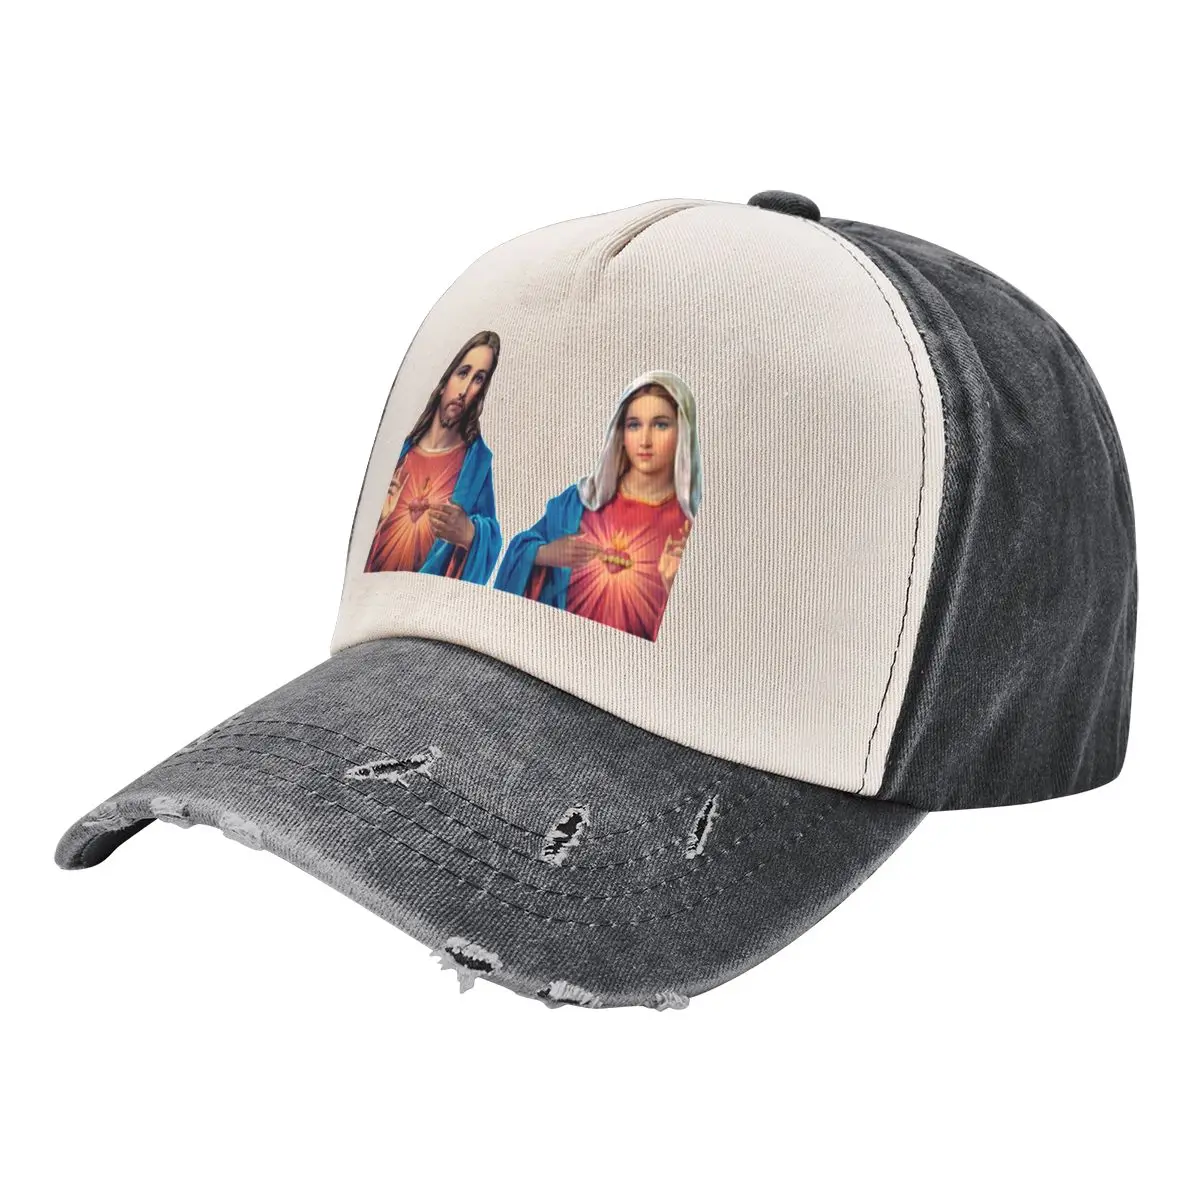 

Sacred and Immaculate Hearts (Jesus and Mary) transparent background Baseball Cap Golf Sports Cap Male Women's